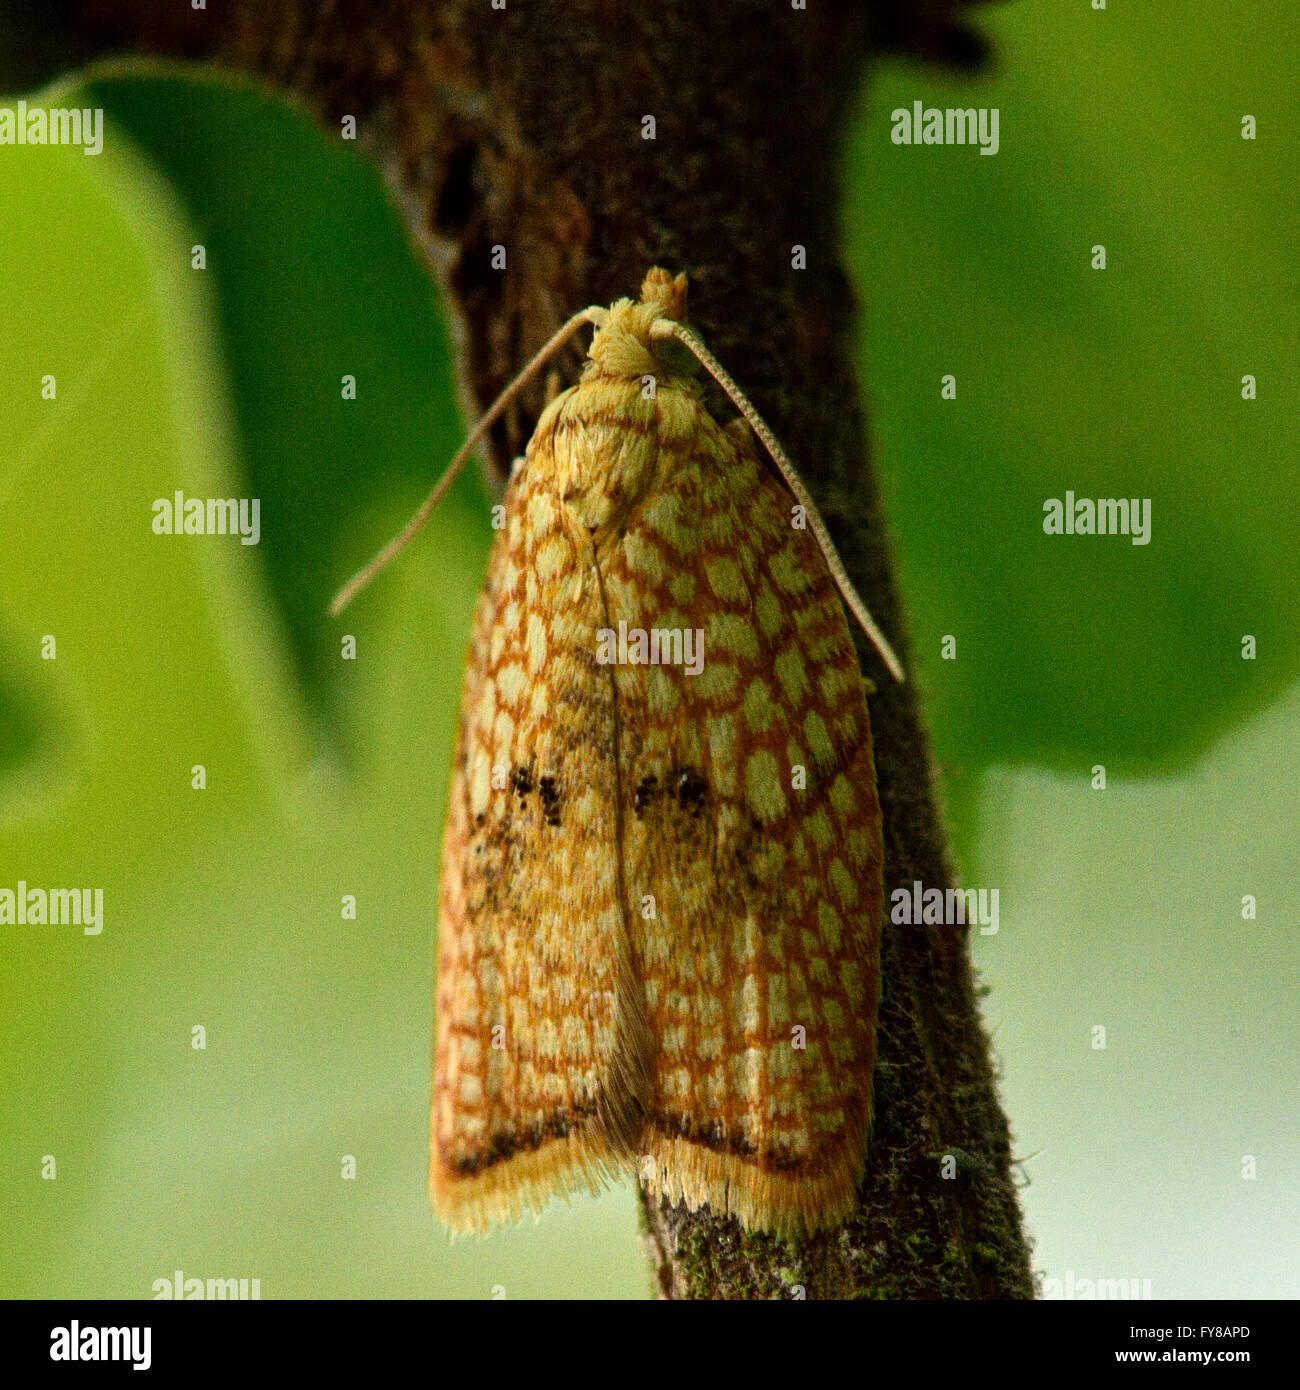 Acleris forsskaleana tortrix micro moth. Small British insect in the family Tortricidae, in the order Lepidoptera, at rest Stock Photo